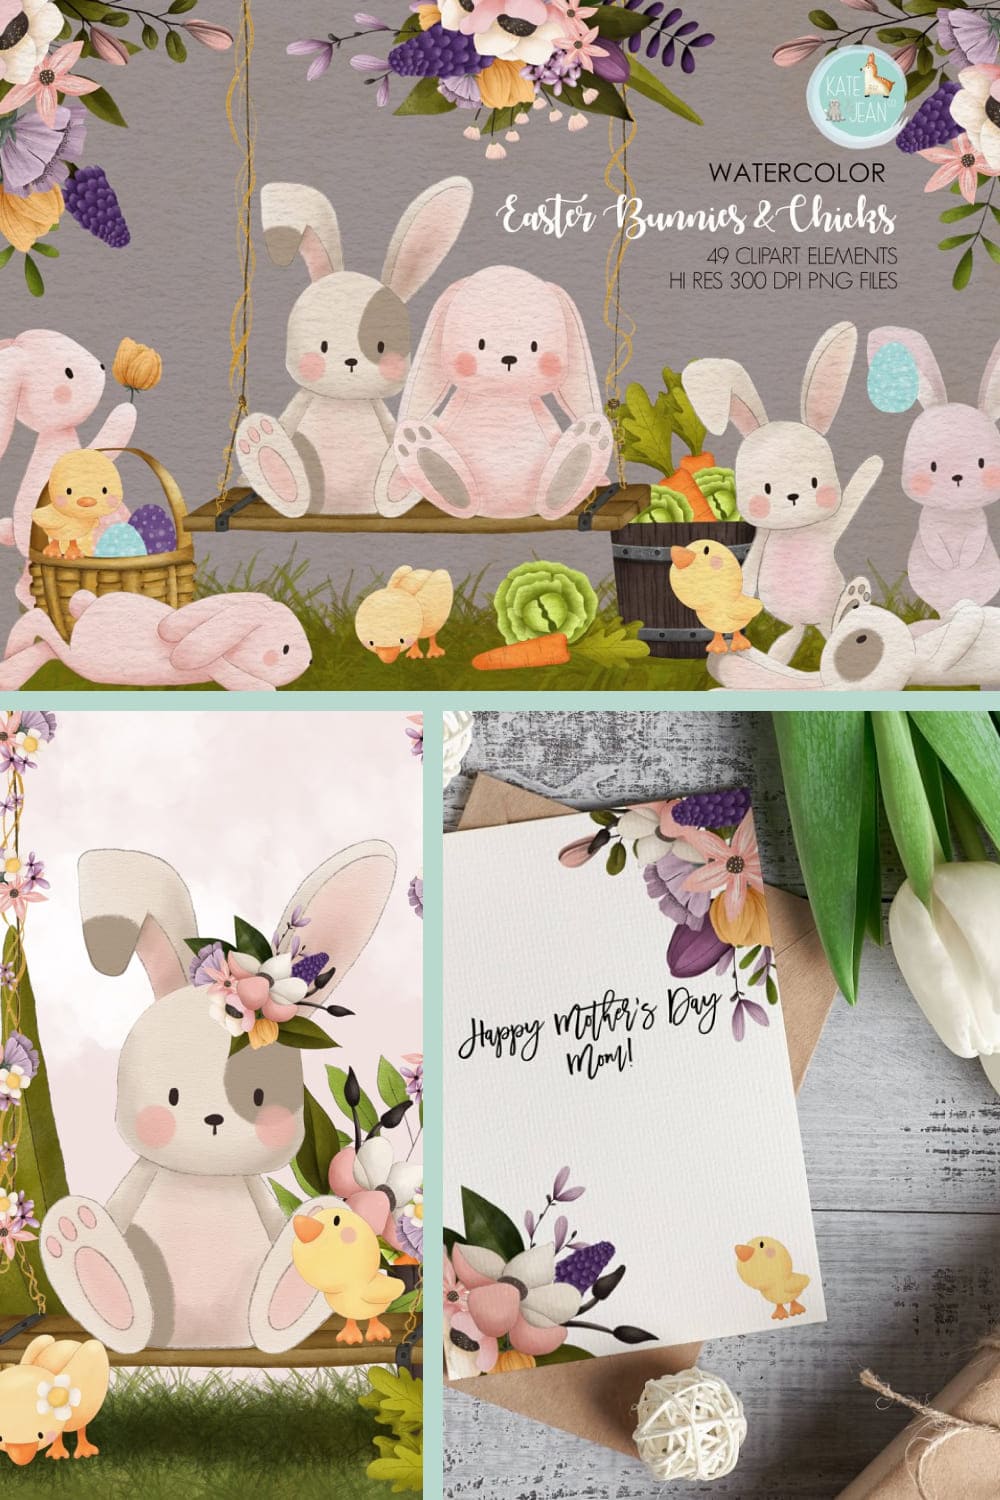 Easter Bunnies And Chicks - Pinterest.